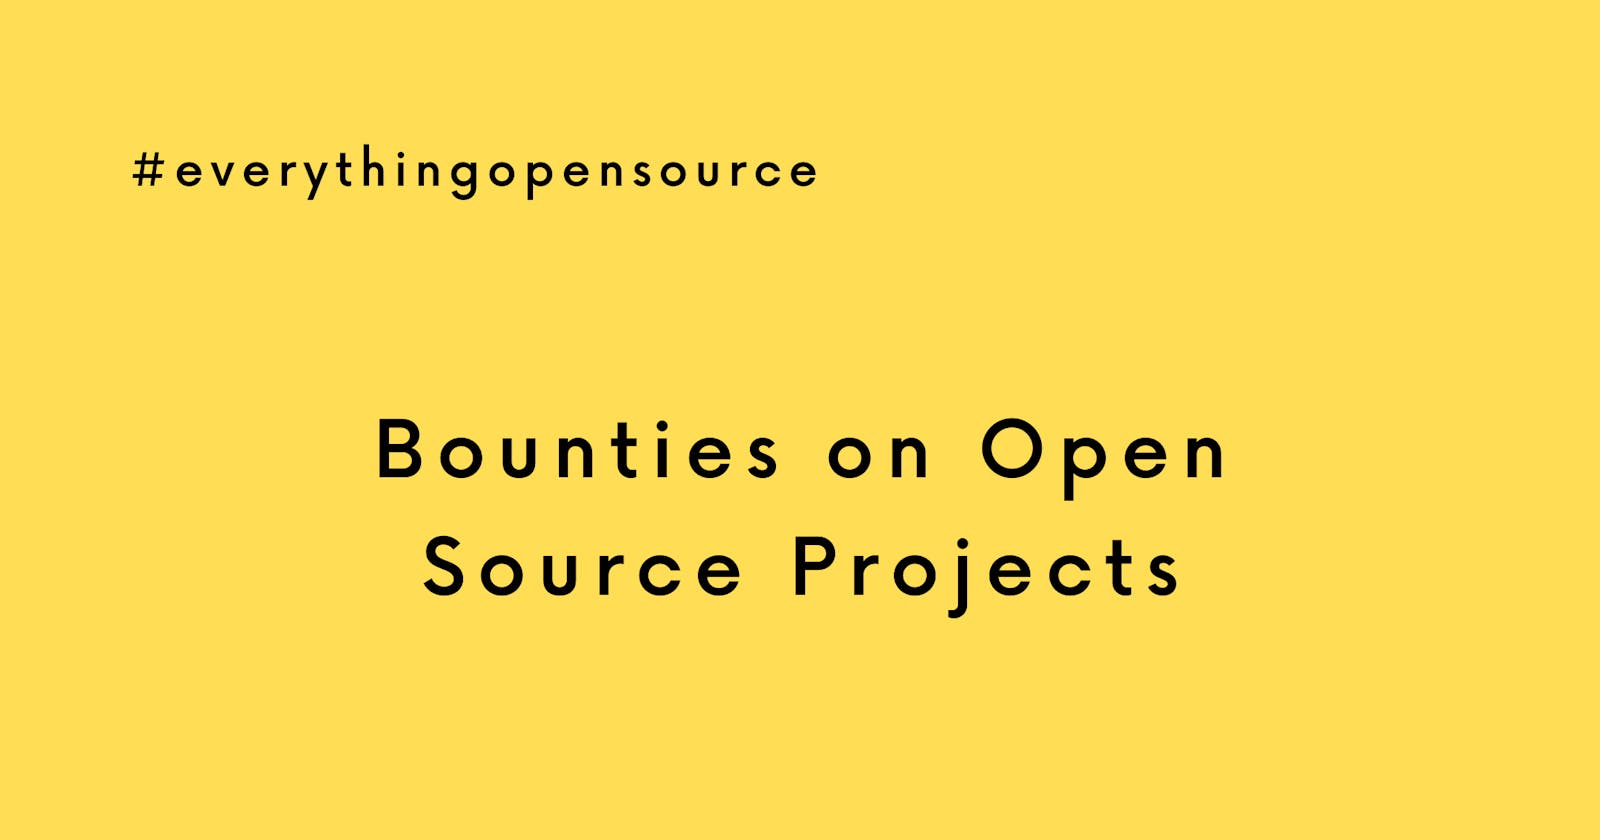 Bounties on Open Source projects? Yes, you read it right!